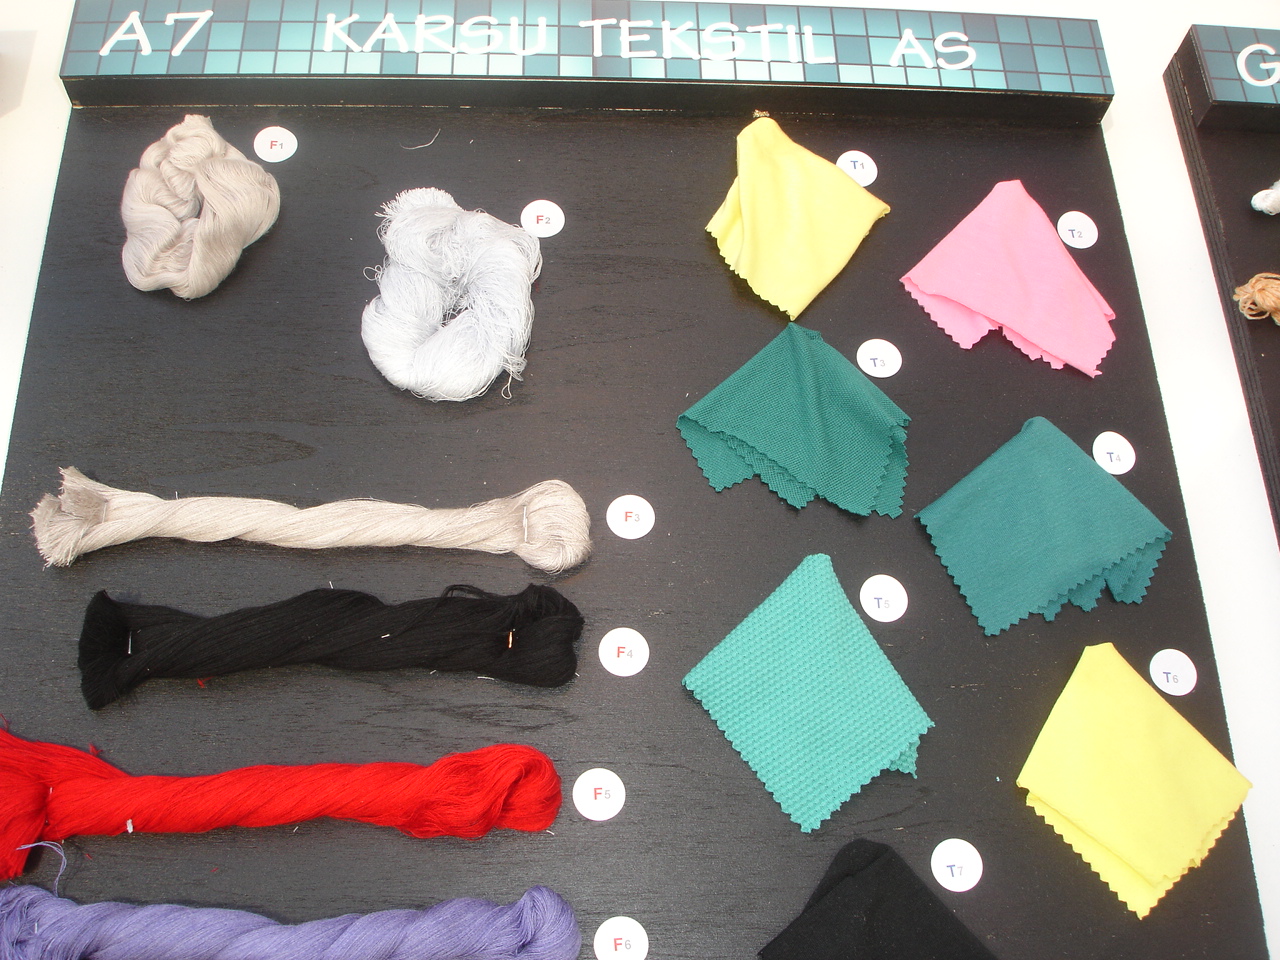 Karsu Tekstil San Tic AS, Turkey, is known as an innovator and one of the first exhibitors to show Lenzing Edelweiss yarns and Promodal/silk blends which ‘combine the brightness of silk and softness of modal’.